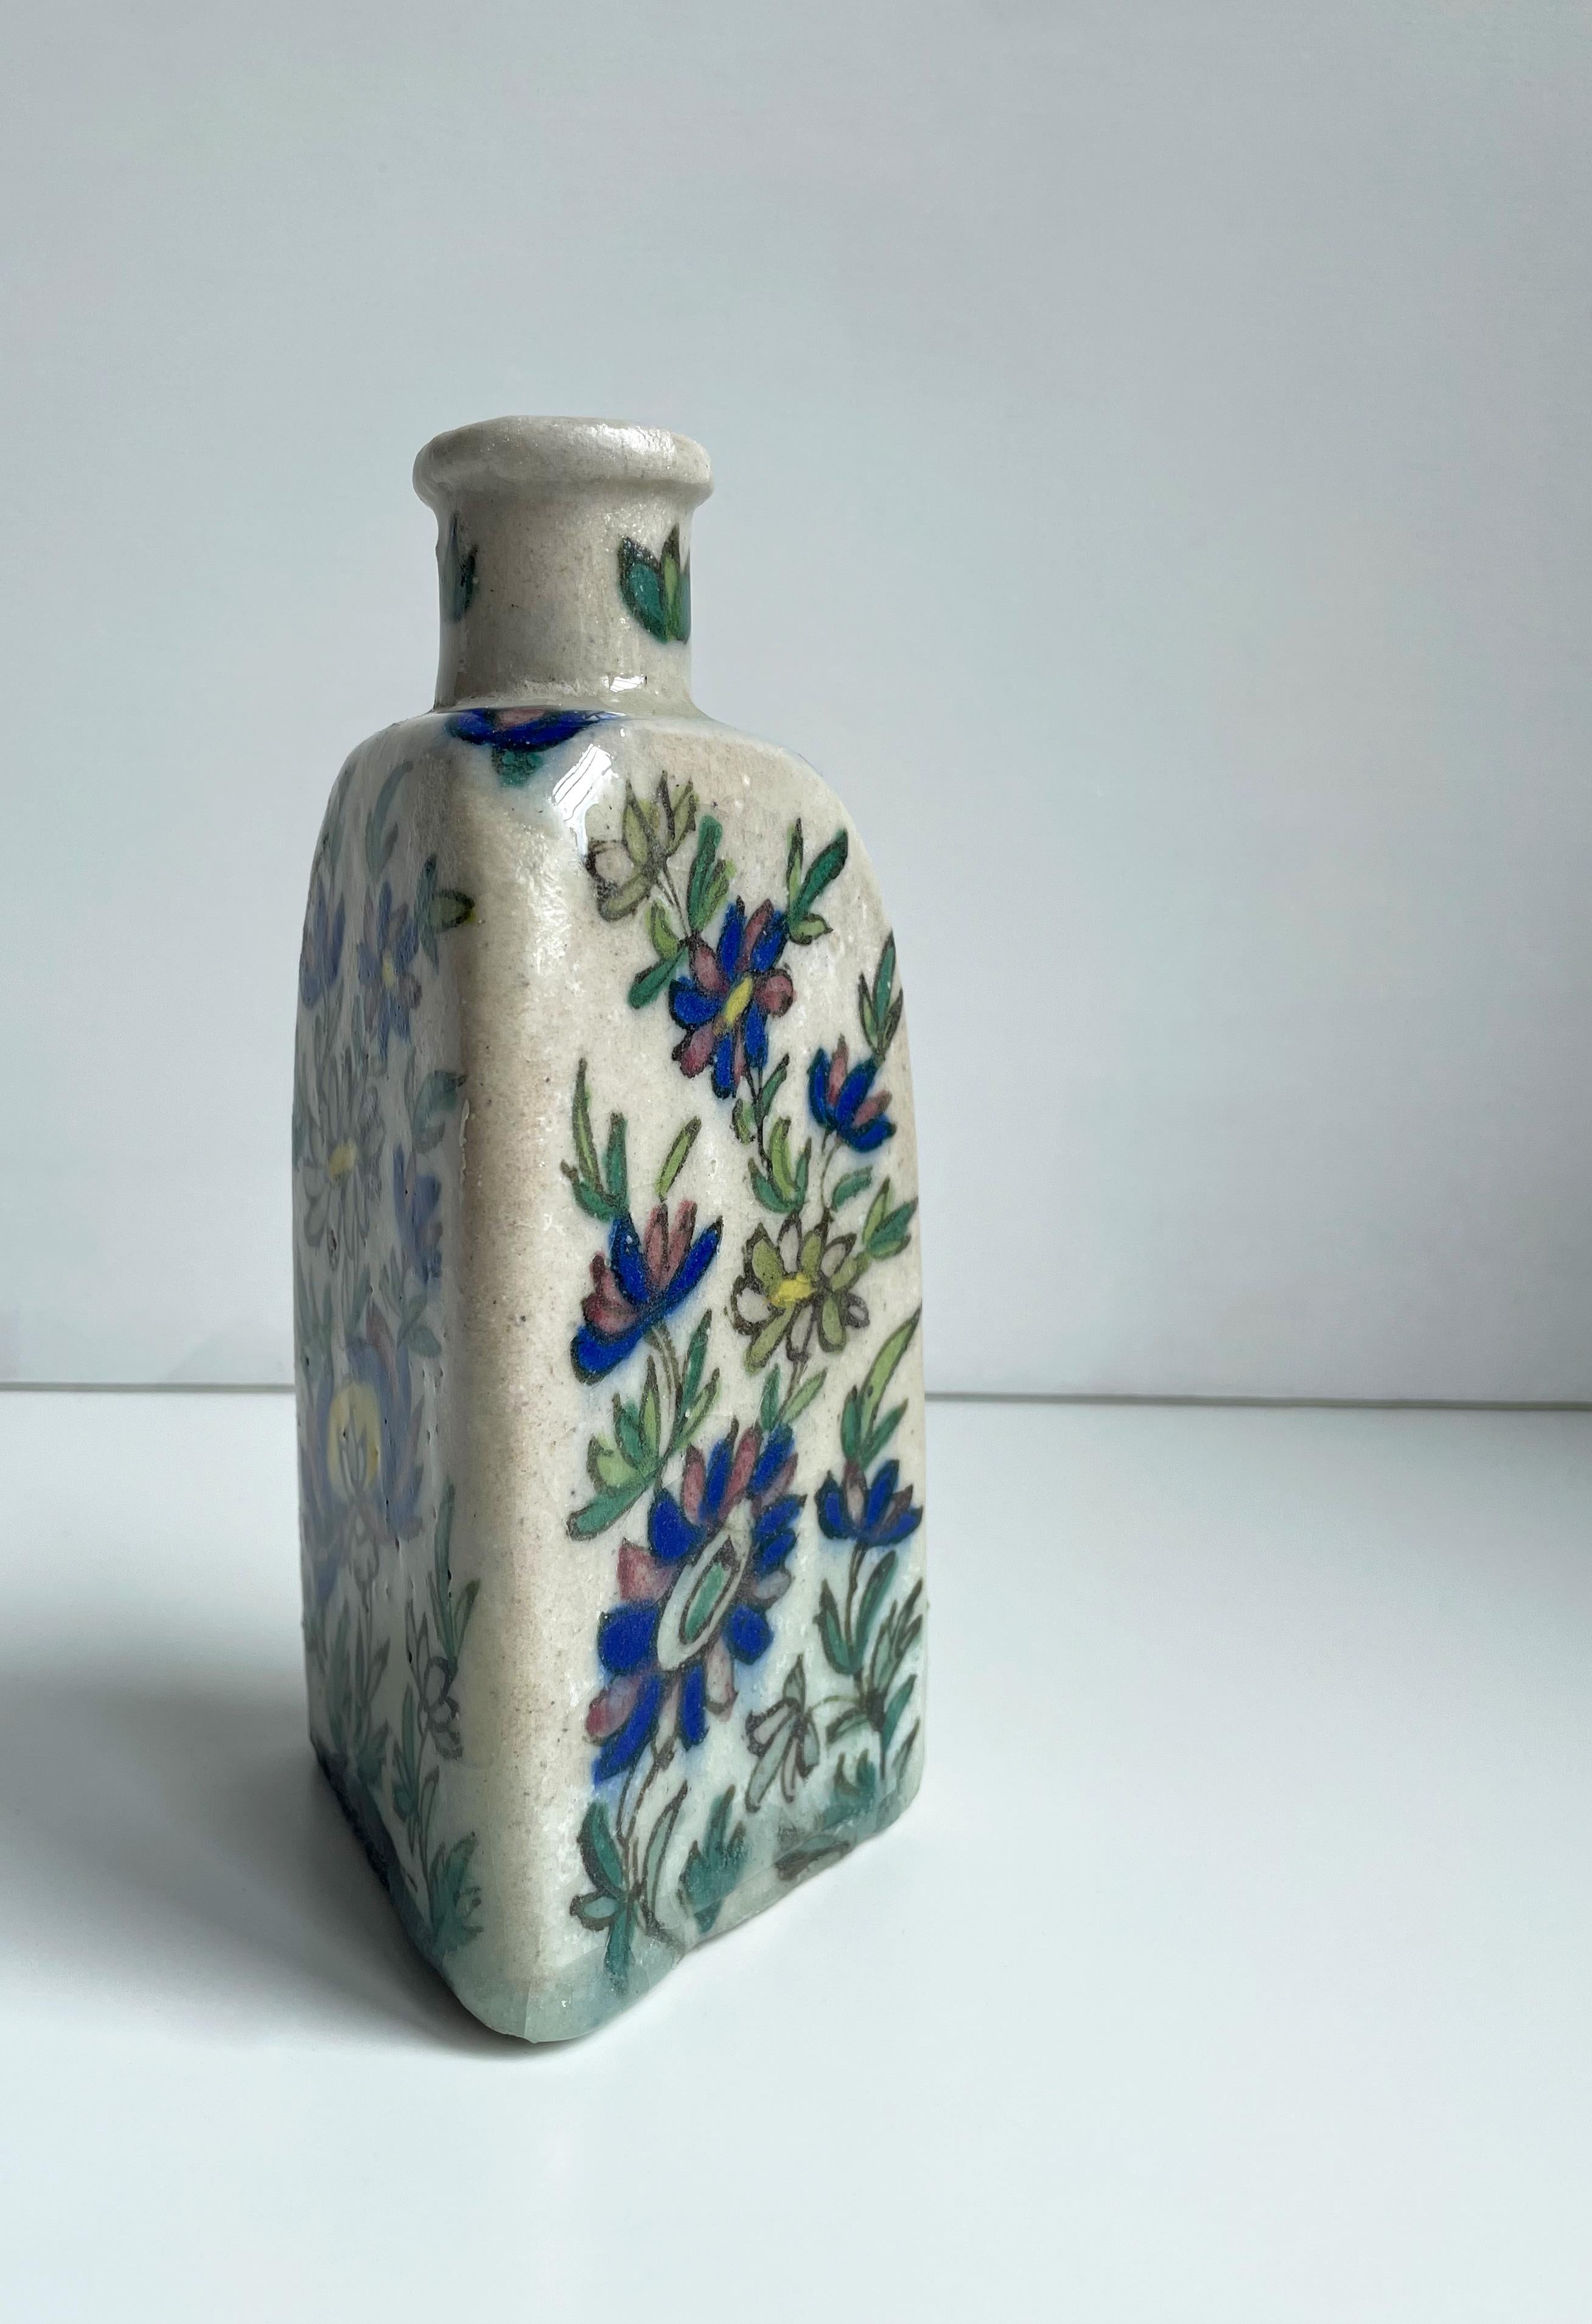 A magnificent triangular Middle Eastern antique handmade ceramic tea bottle with hand painted highly colorful decor and clear glaze. Light and dark green, red, yellow and admiral blue organic floral decorations on a greyish white base with clear